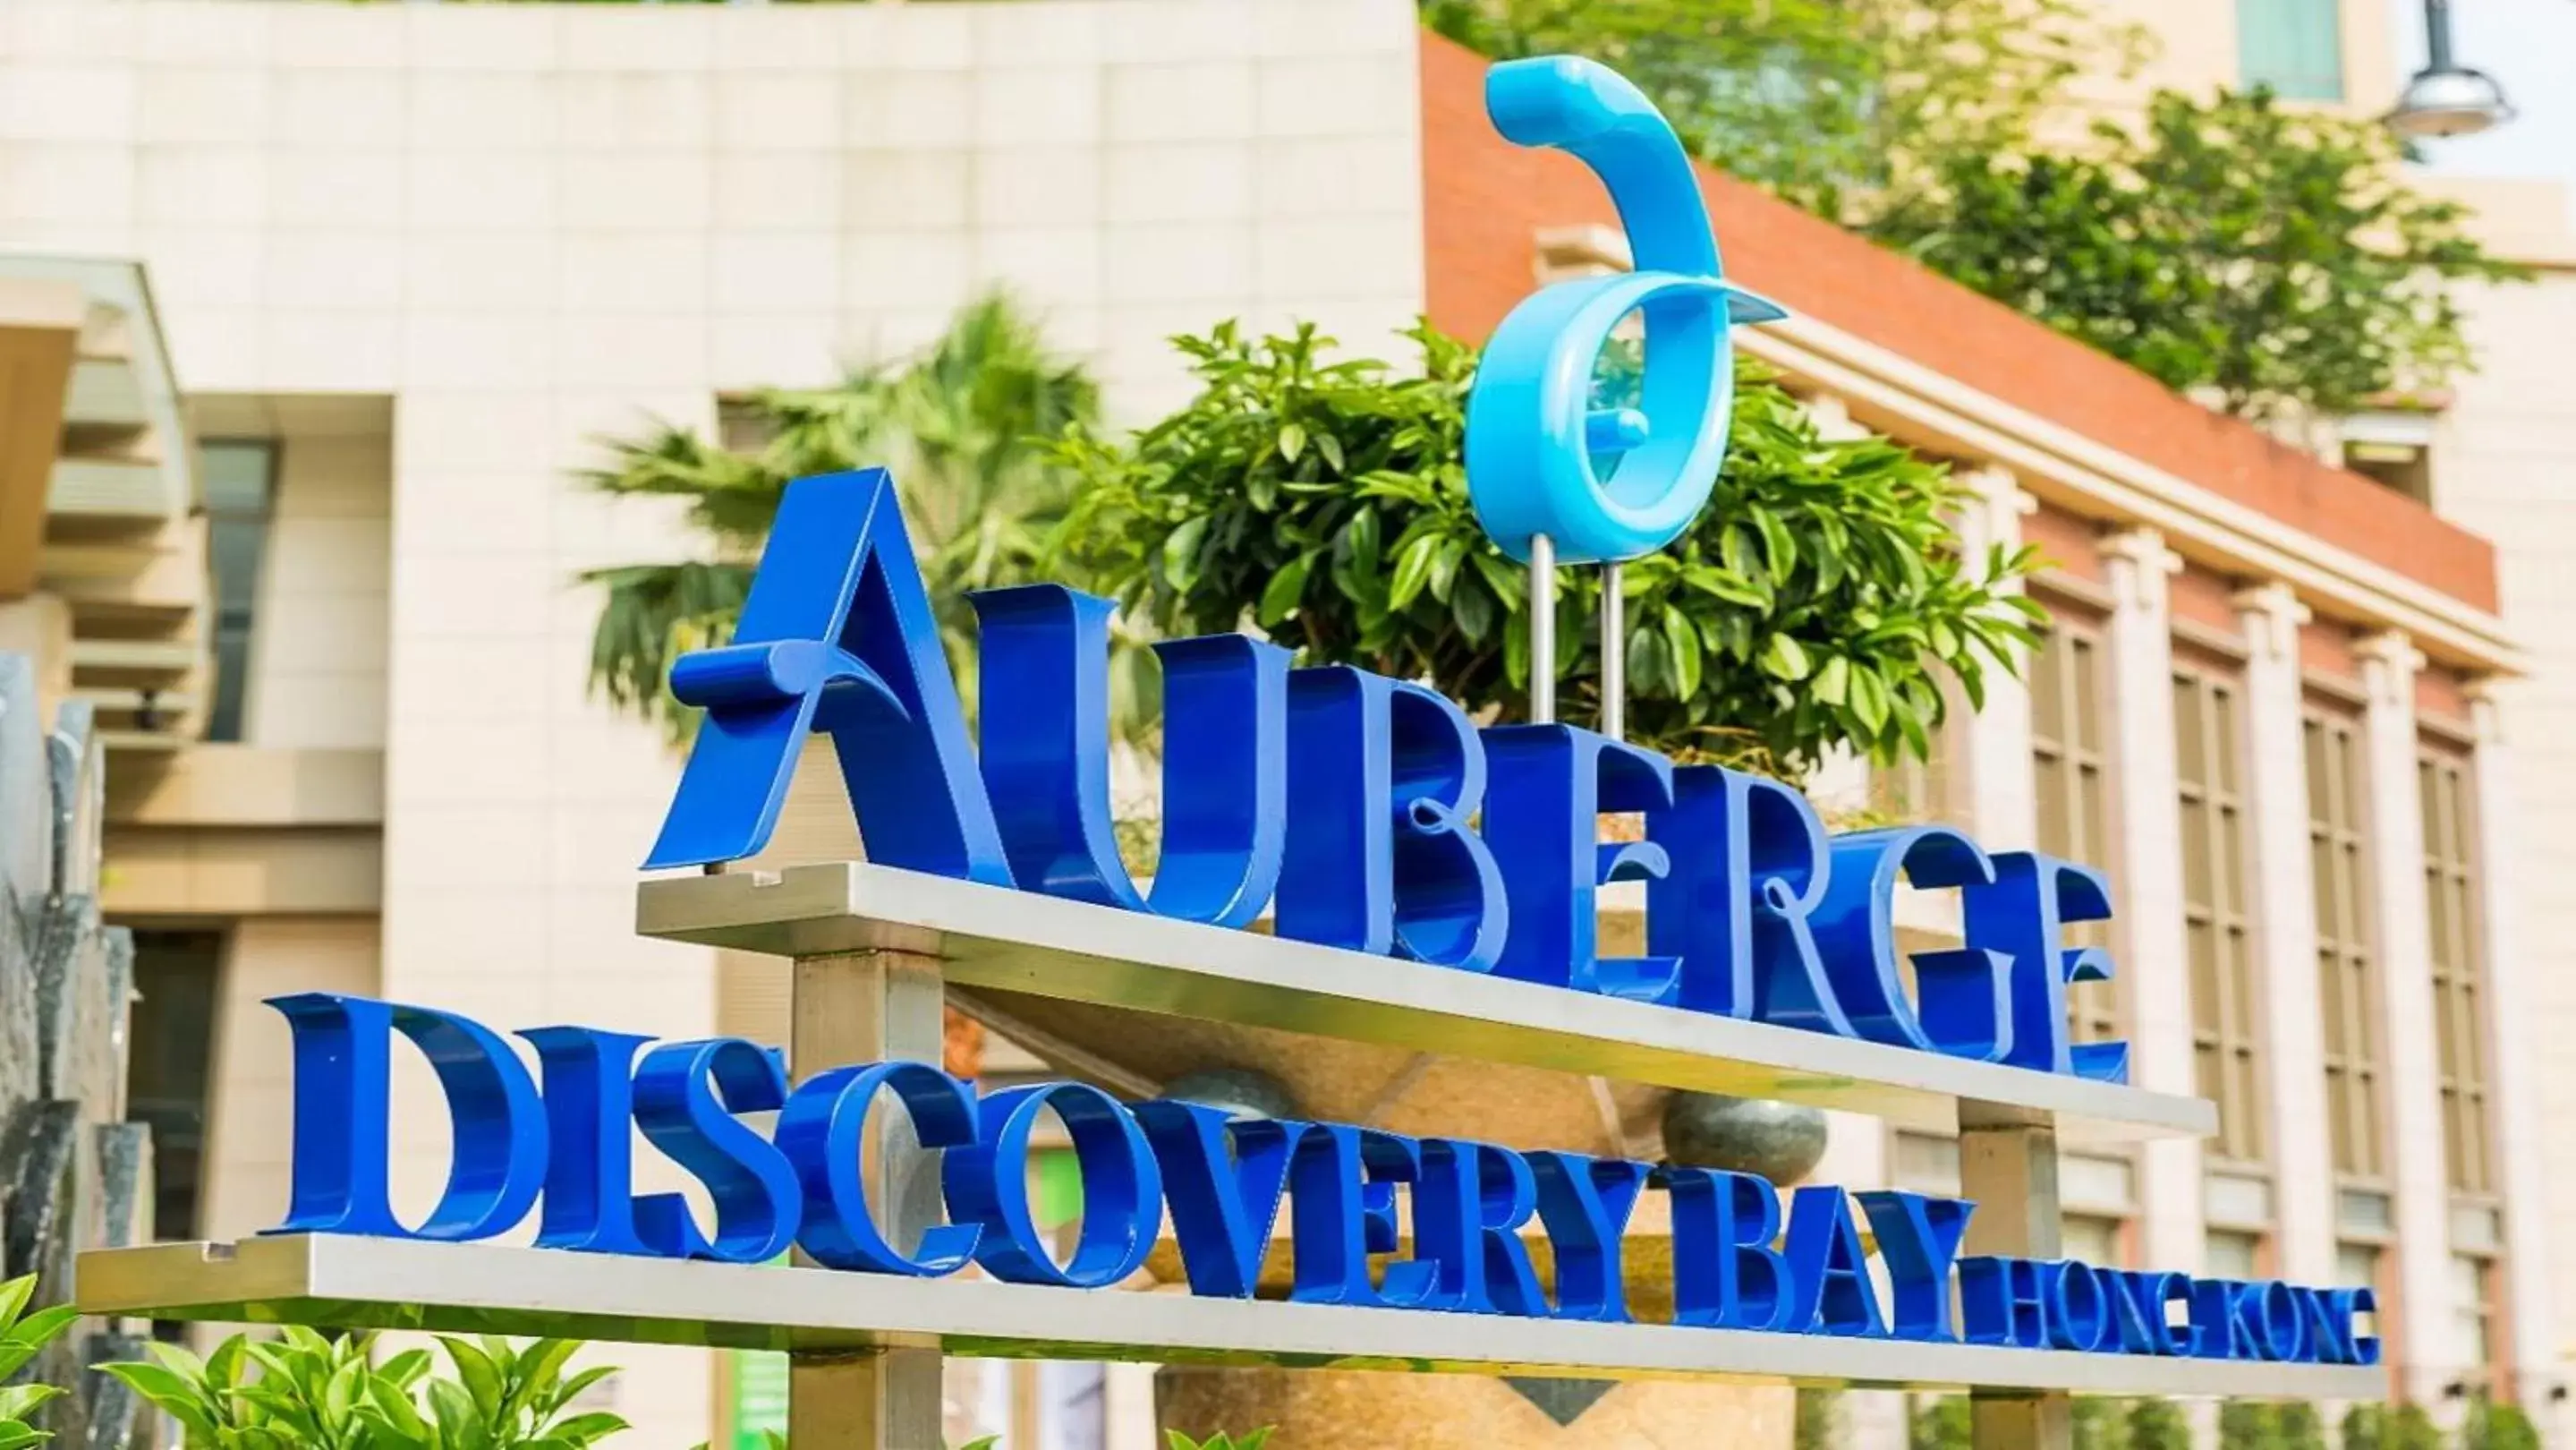 Logo/Certificate/Sign, Property Logo/Sign in Auberge Discovery Bay Hong Kong